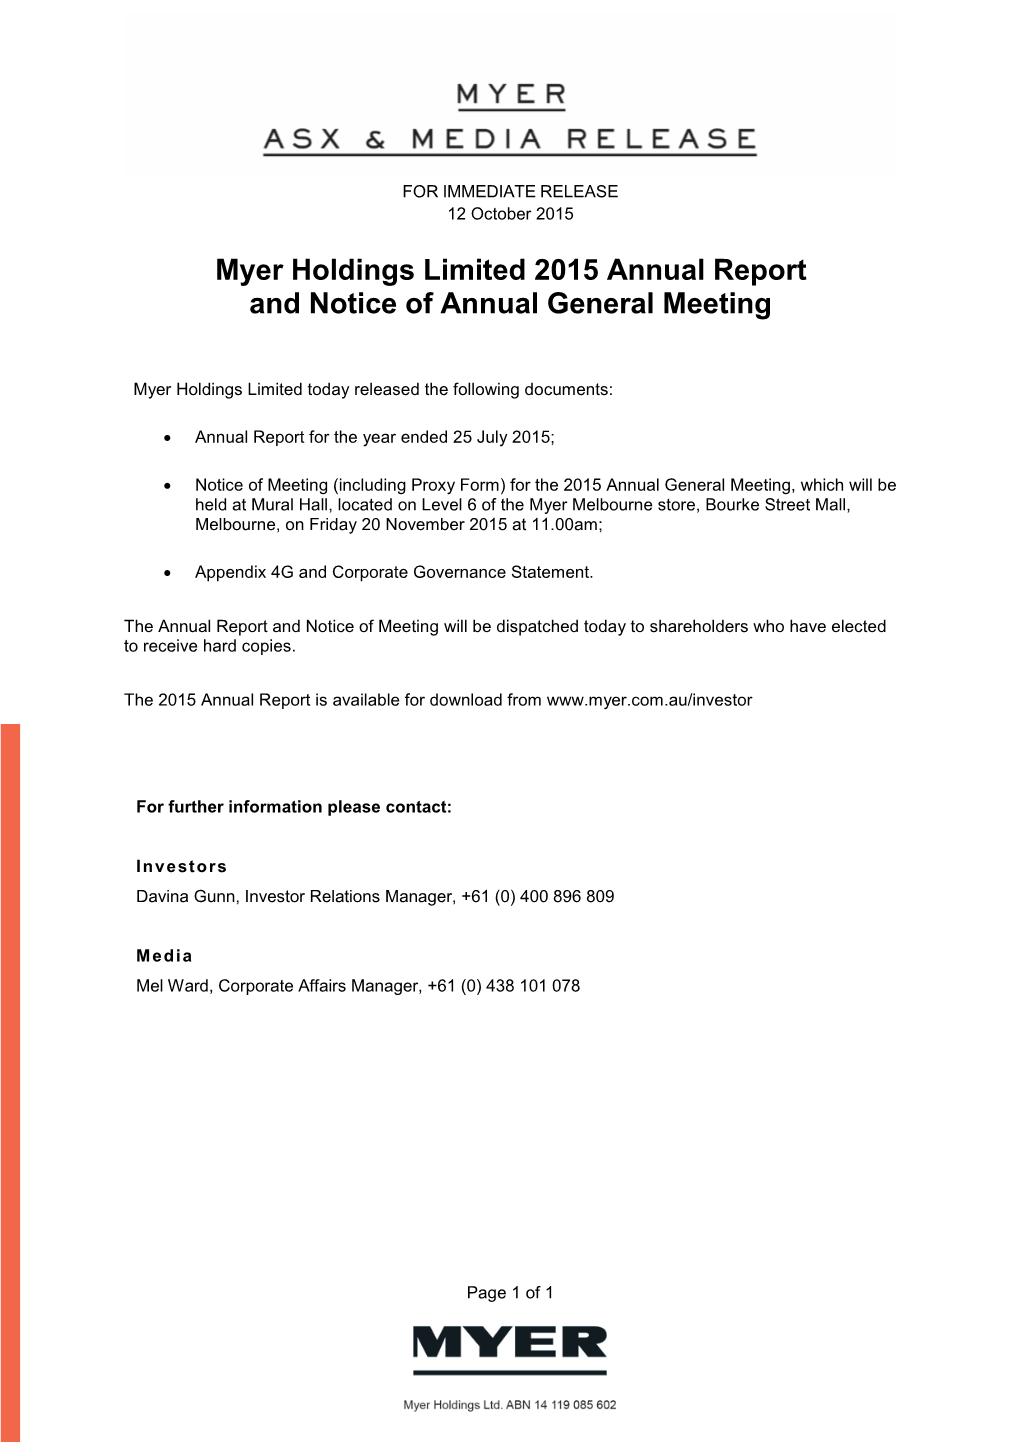 Myer Holdings Limited 2015 Annual Report and Notice of Annual General Meeting